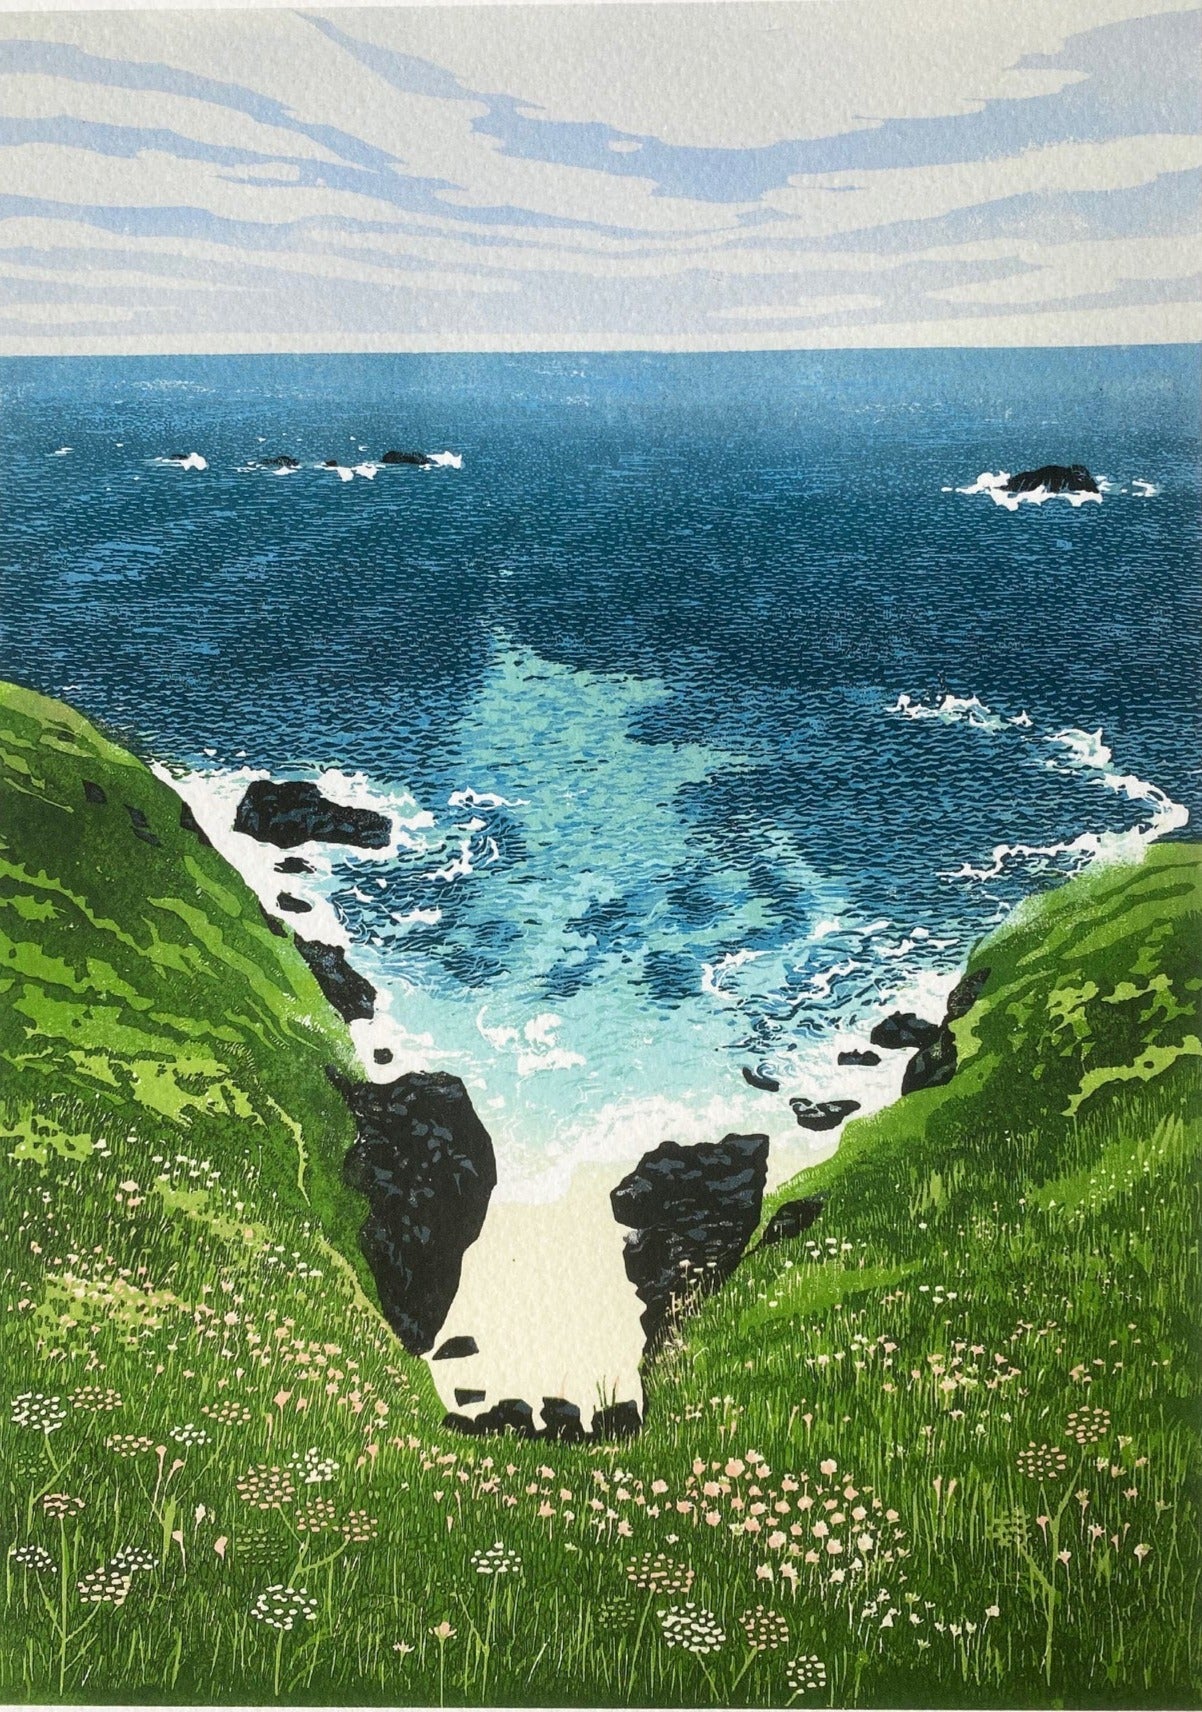 Coastal Cove Pendeen. Art print of a Cornish Cove, Coastal path view in Cornwall. Looking down the cliff to the sea.